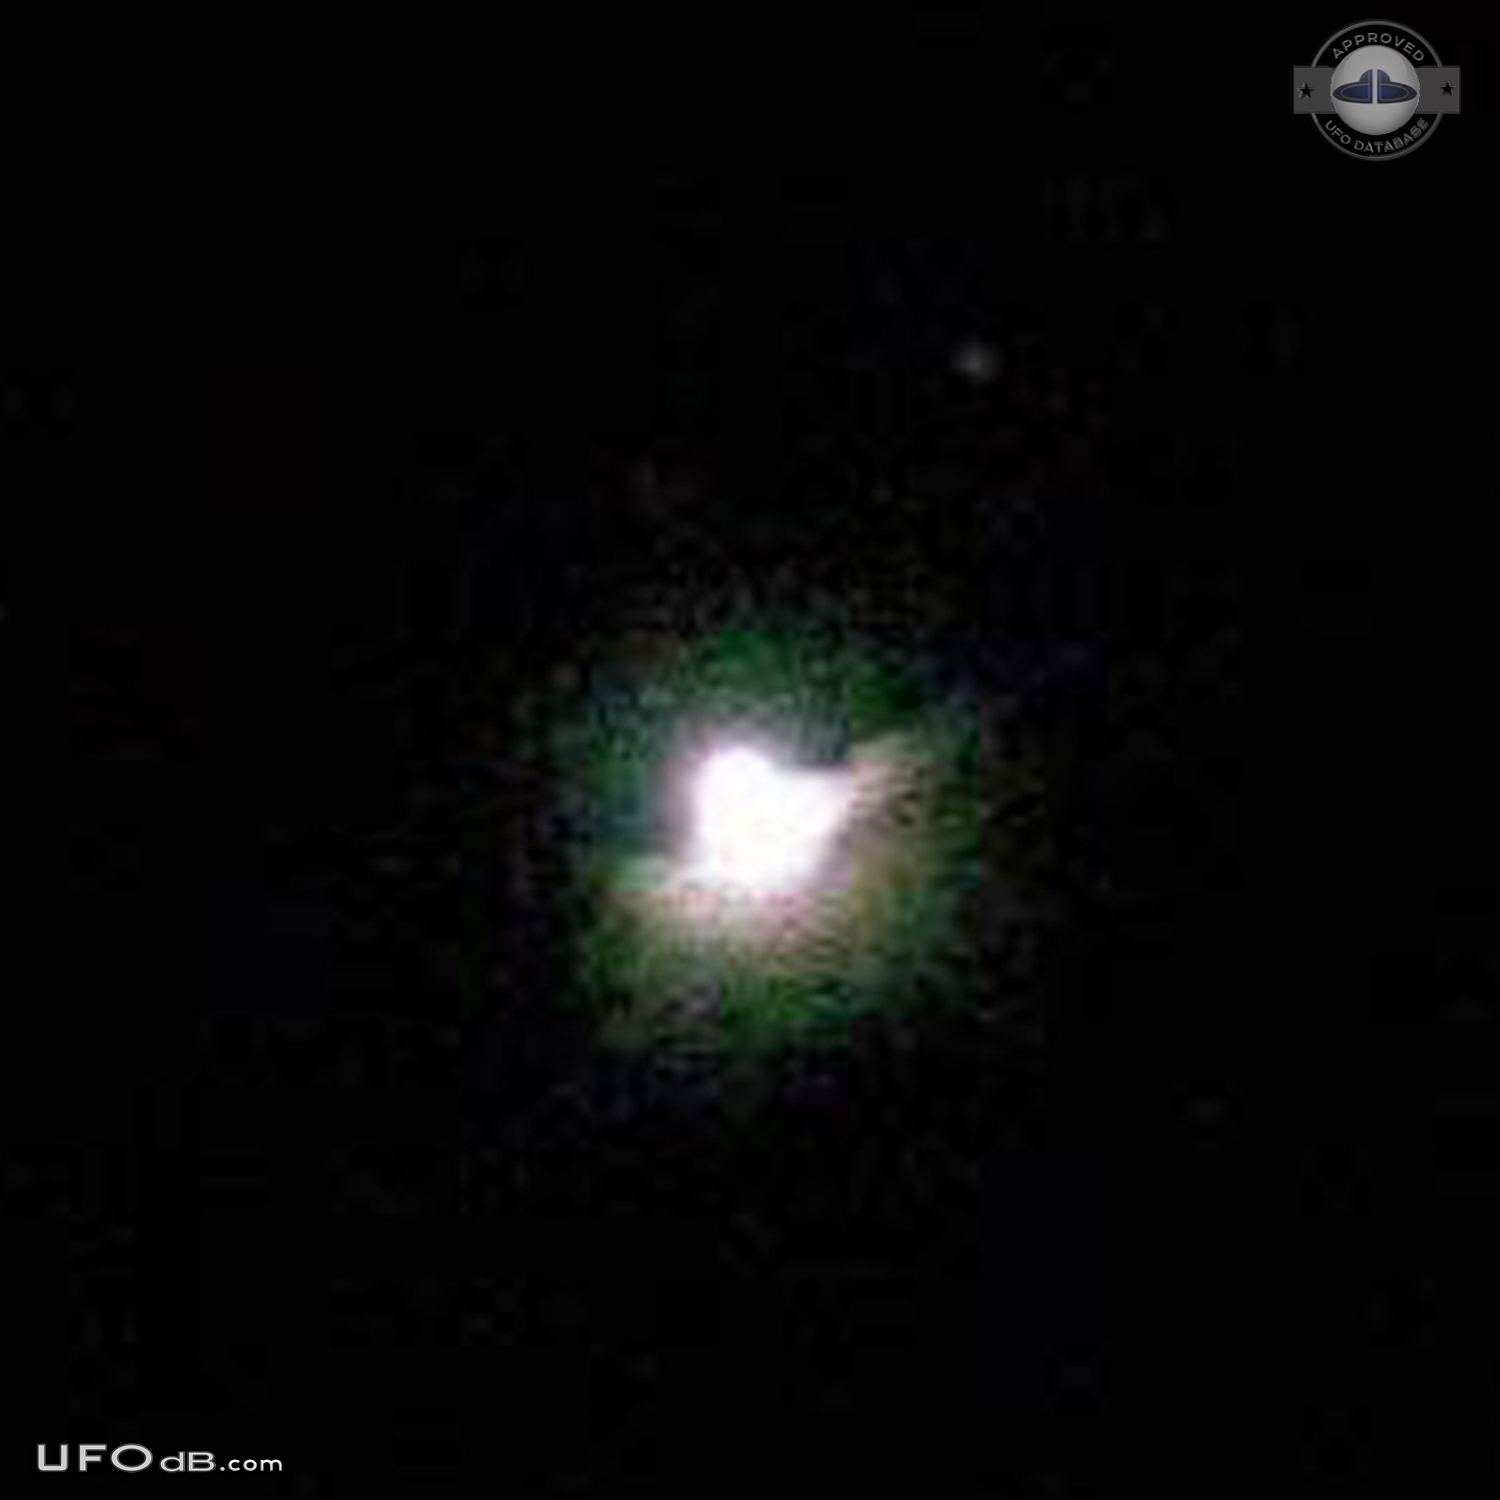 Bright UFO in the night sky of Herning Denmark caught on picture 2007 UFO Picture #445-2